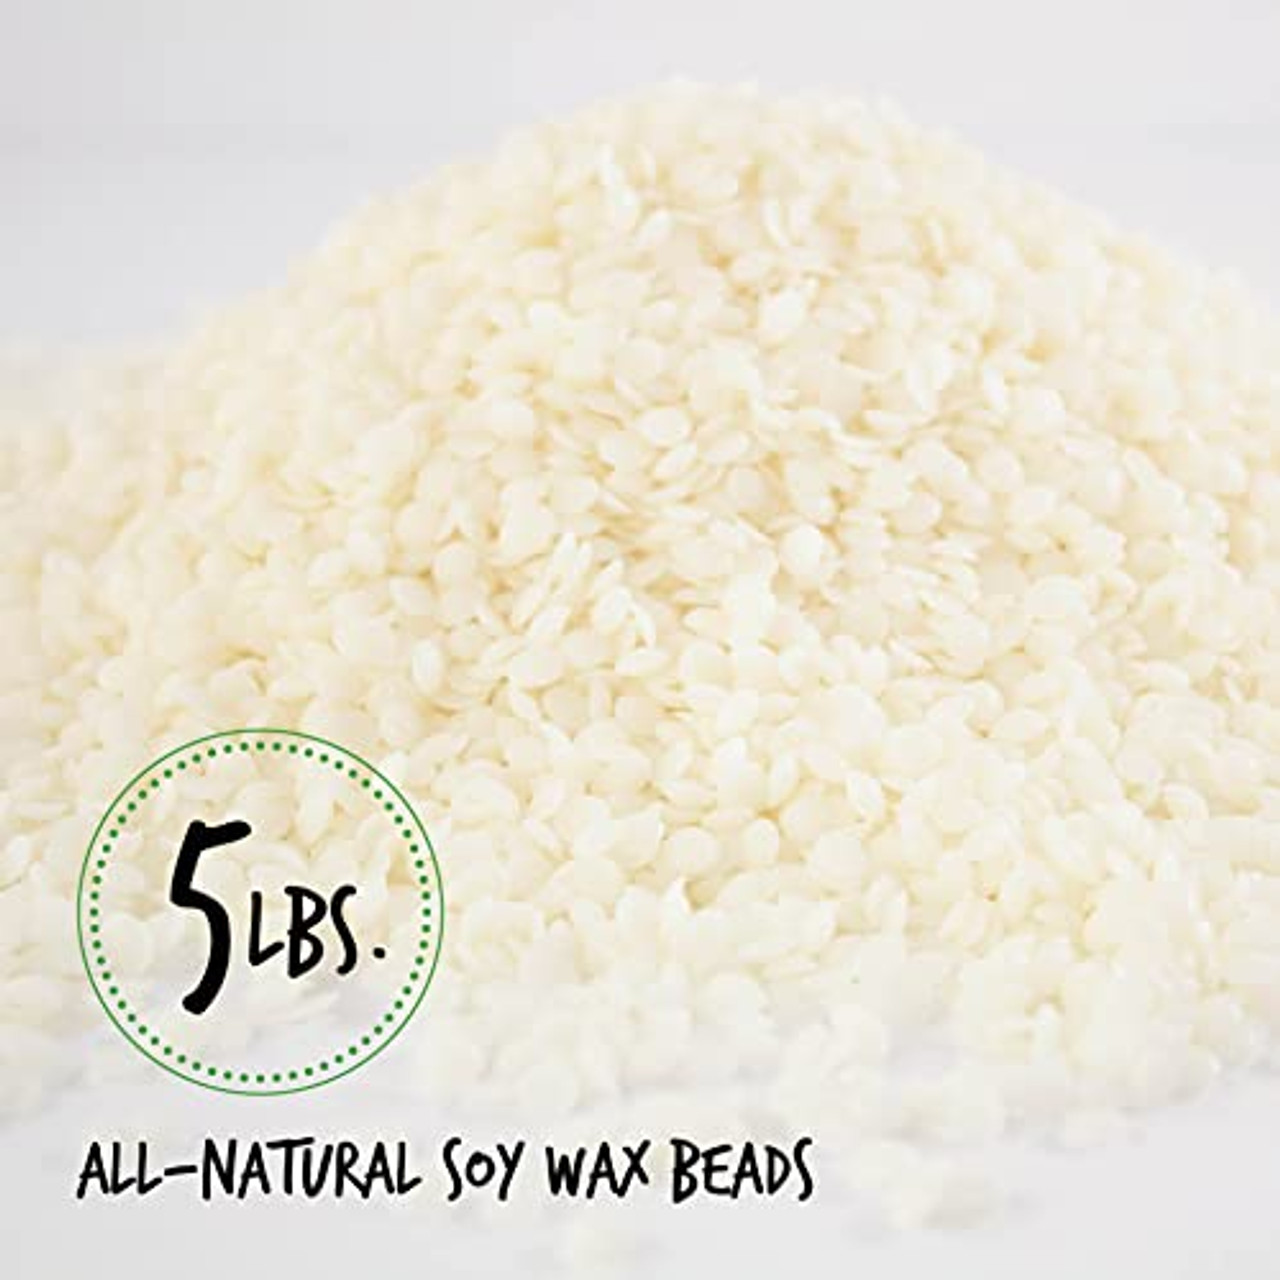 American Soy Organics- 1 lb of Freedom Soy Wax Beads for Candle Making – Microwavable Soy Wax Beads – Premium Soy Candle Making Supplies